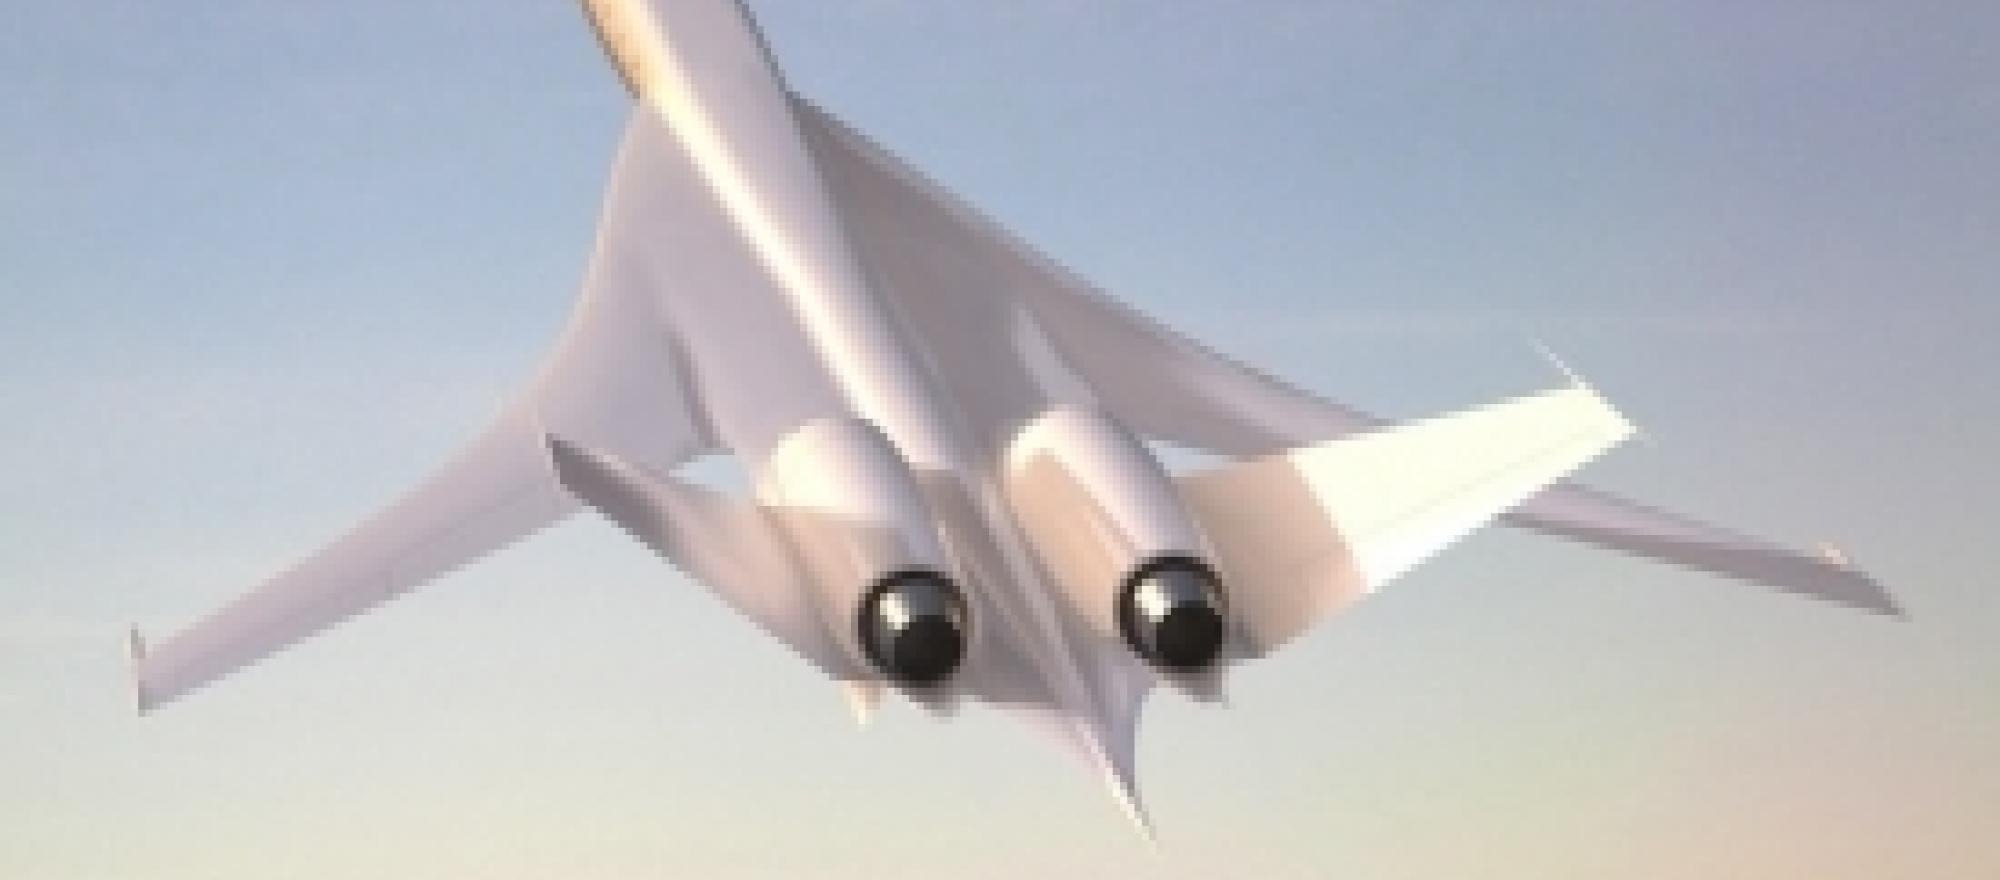 HyperMach Aerospace’s planned 20-seat supersonic business jet